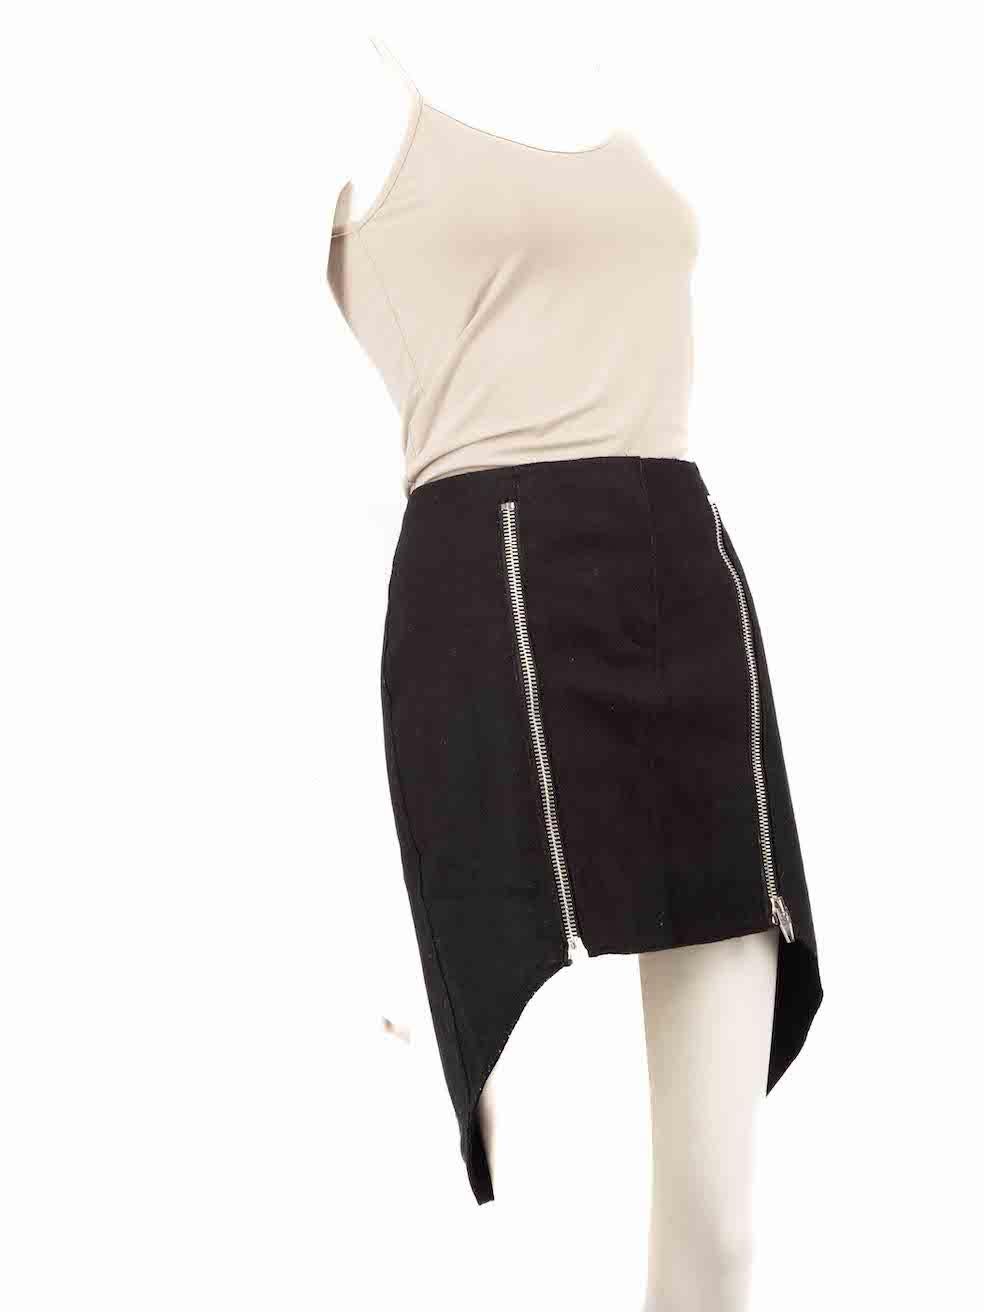 CONDITION is Good. Minor wear to skirt is evident. Light wear to the rear left pocket with a missing press stud on this used Alexander Wang designer resale item.
 
 
 
 Details
 
 
 Black
 
 Wool
 
 Skirt
 
 Mini
 
 Zipped detail
 
 2x Zipped